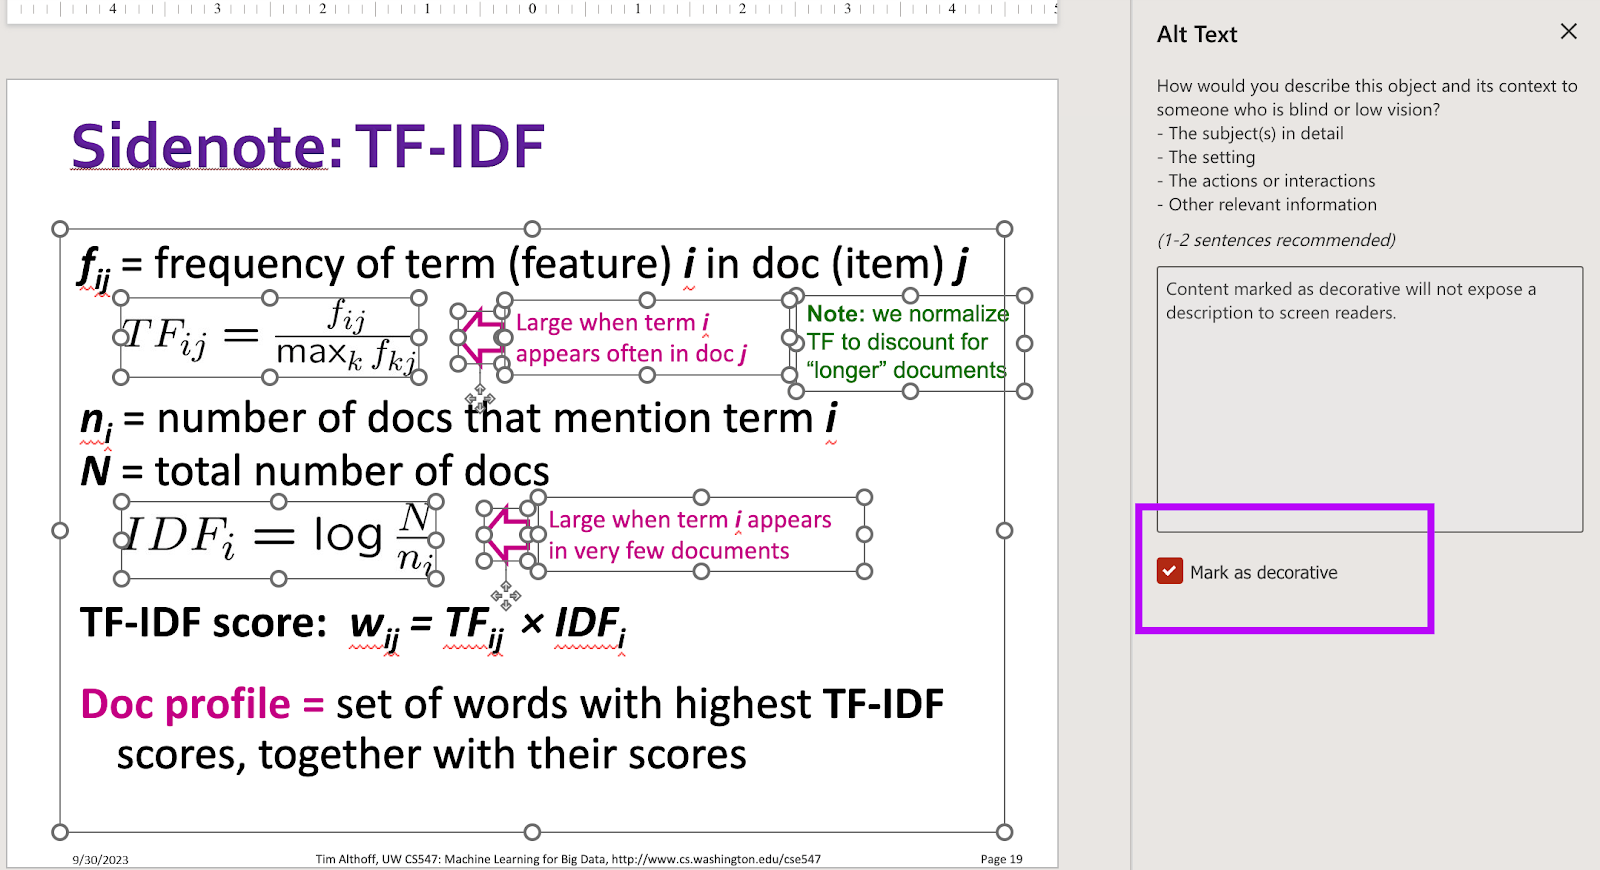 This is the same screenshot of the powerpoint and the alt text panel as above. This time, all the math components and the associated texts are marked decorative on the alt text panel.